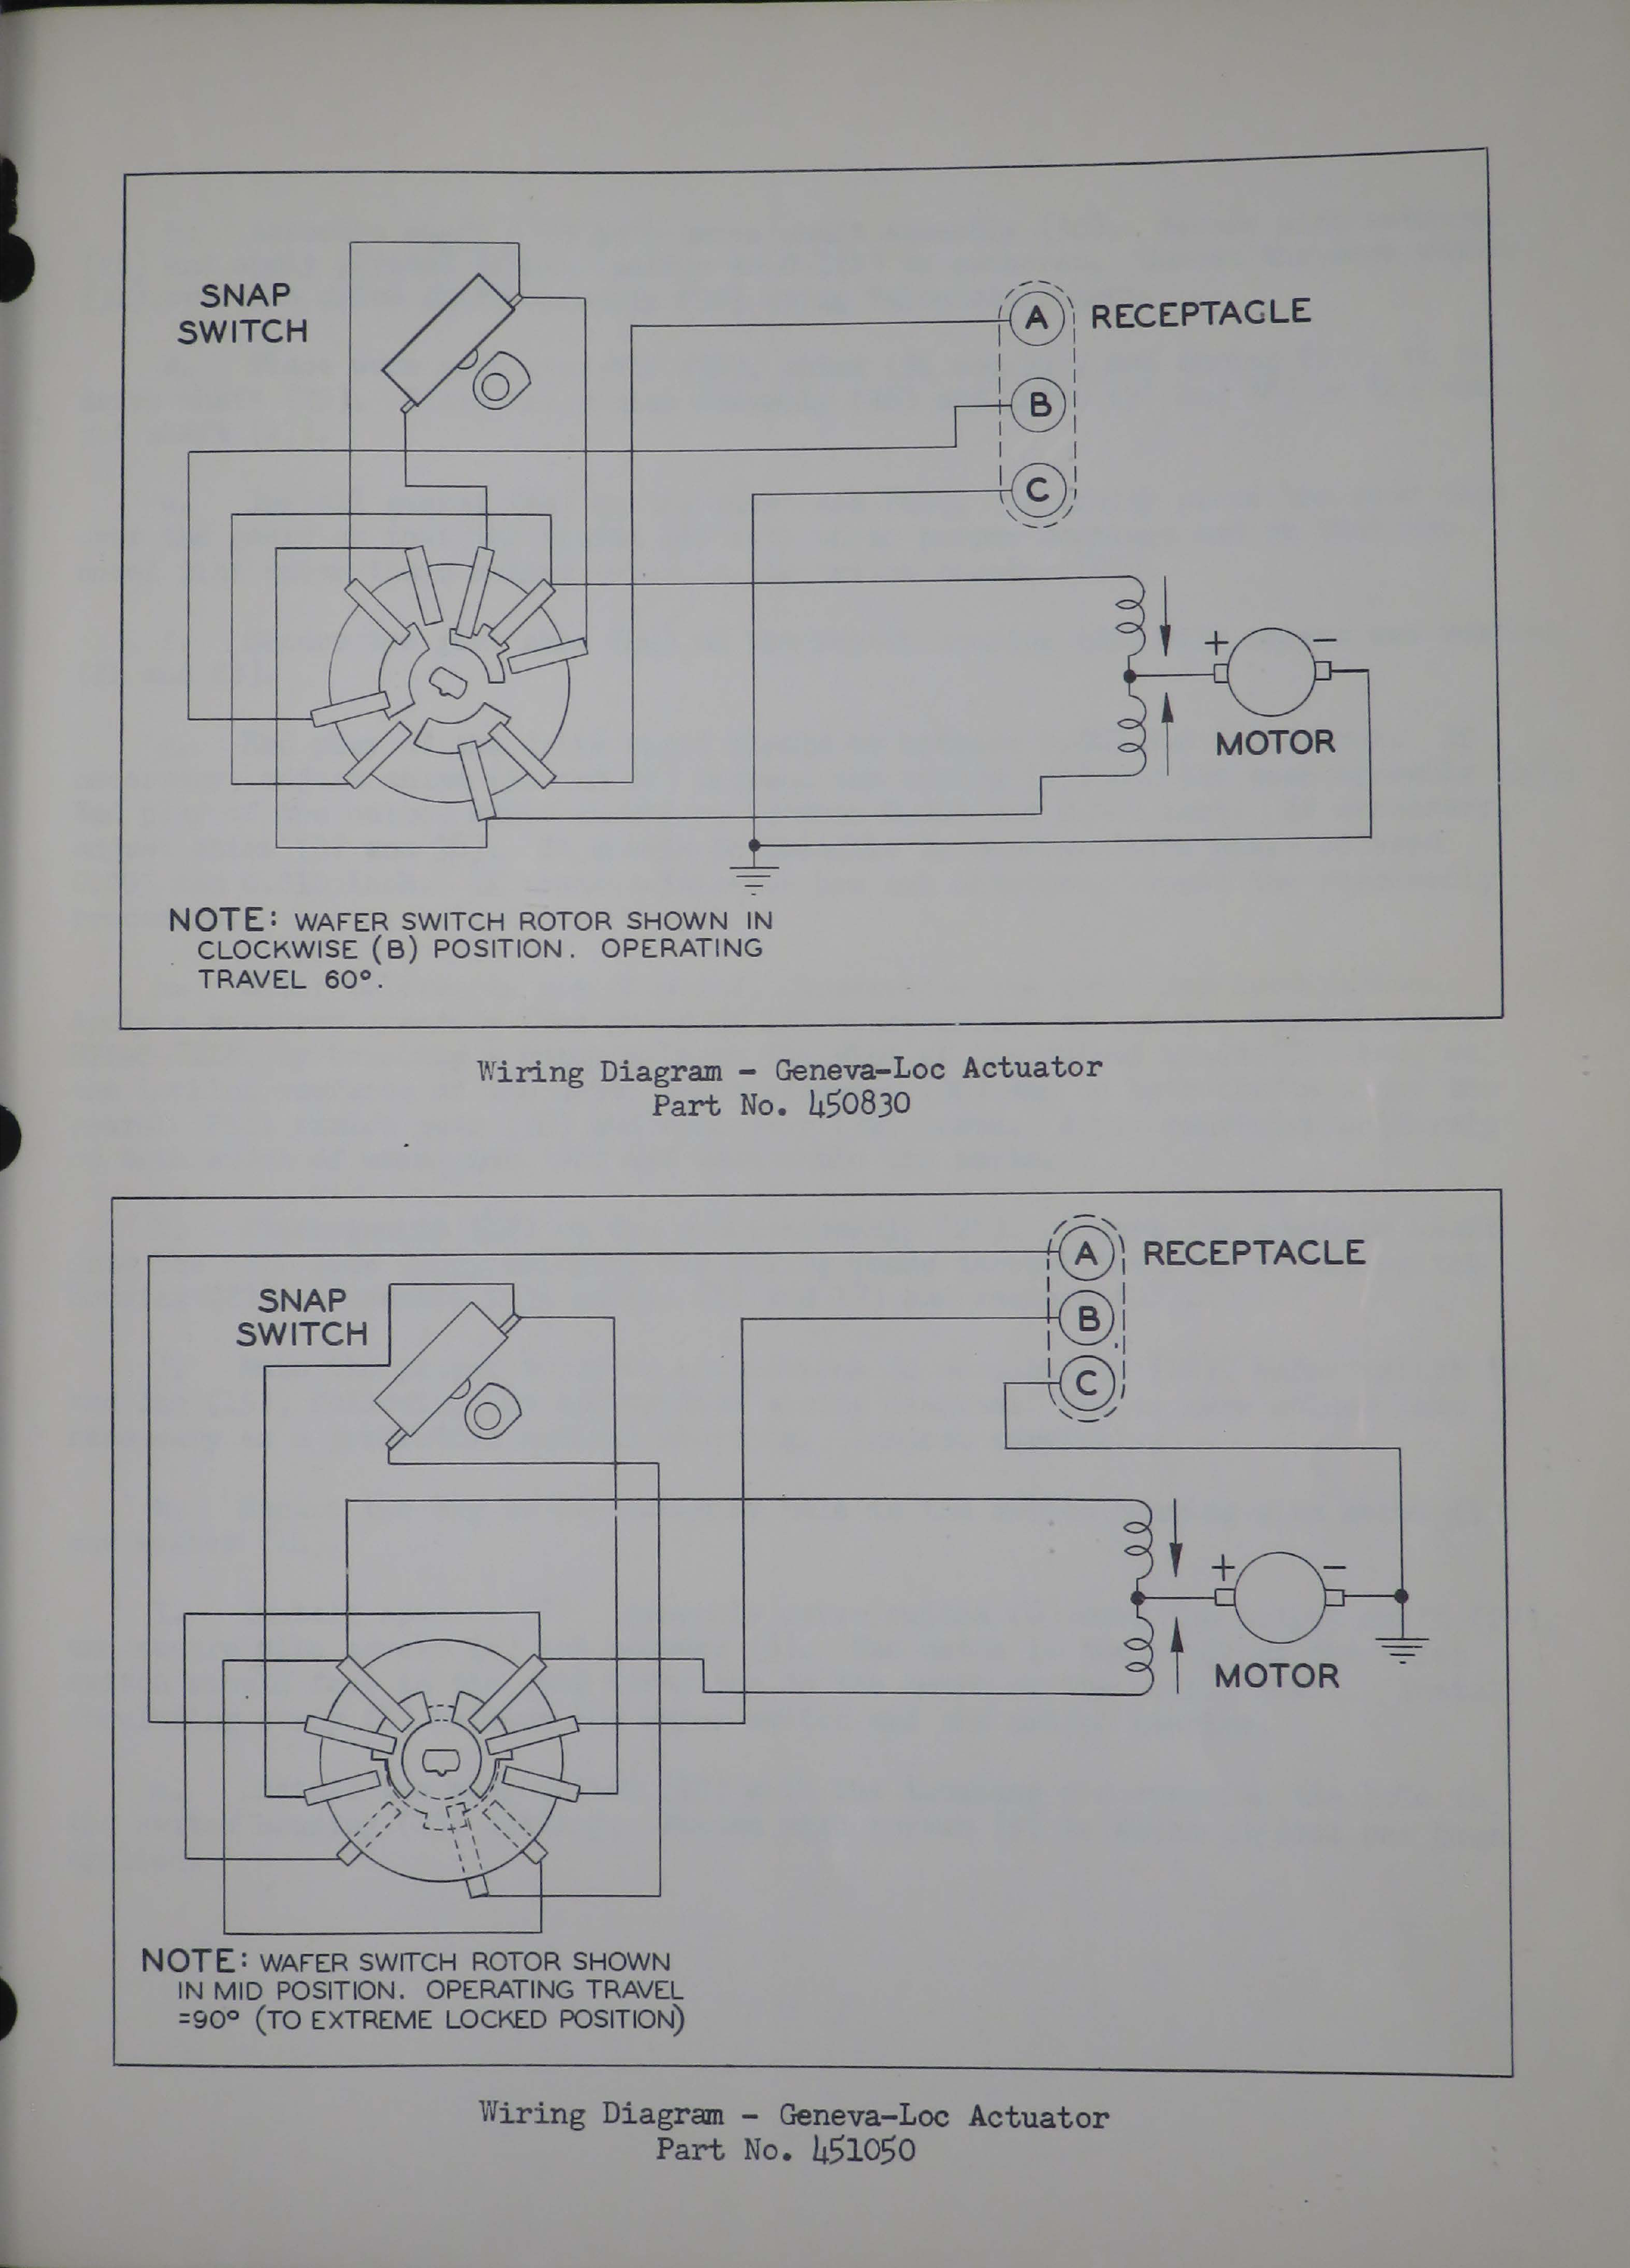 Sample page 7 from AirCorps Library document: Geneva-Loc Actuators - Parts 450830 and 451050 